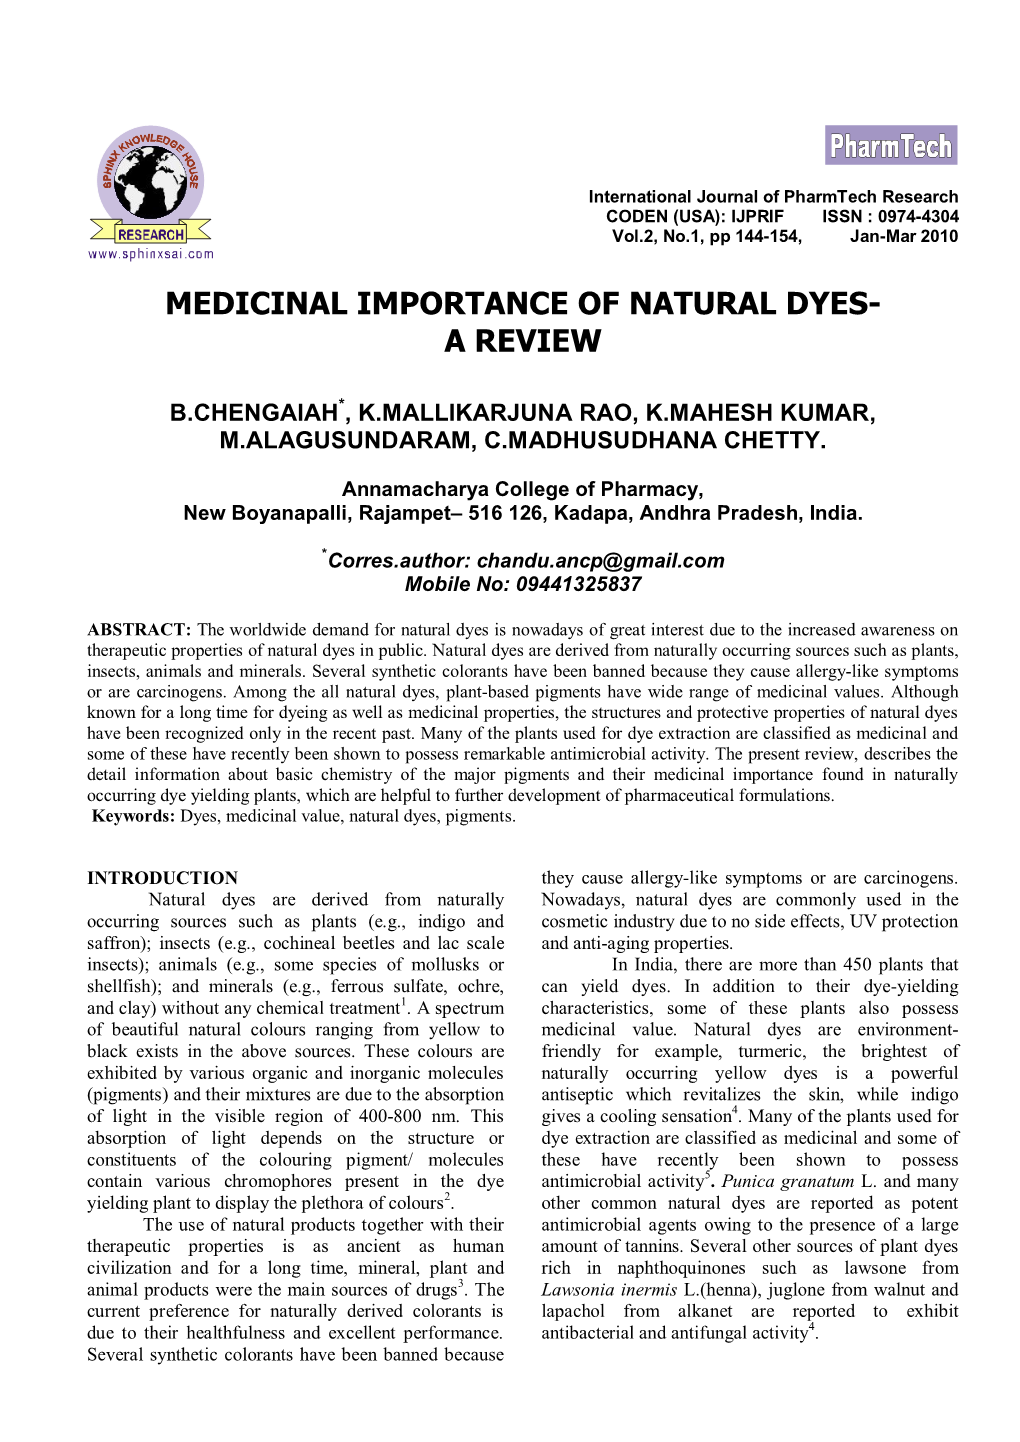 Medicinal Importance of Natural Dyes- a Review